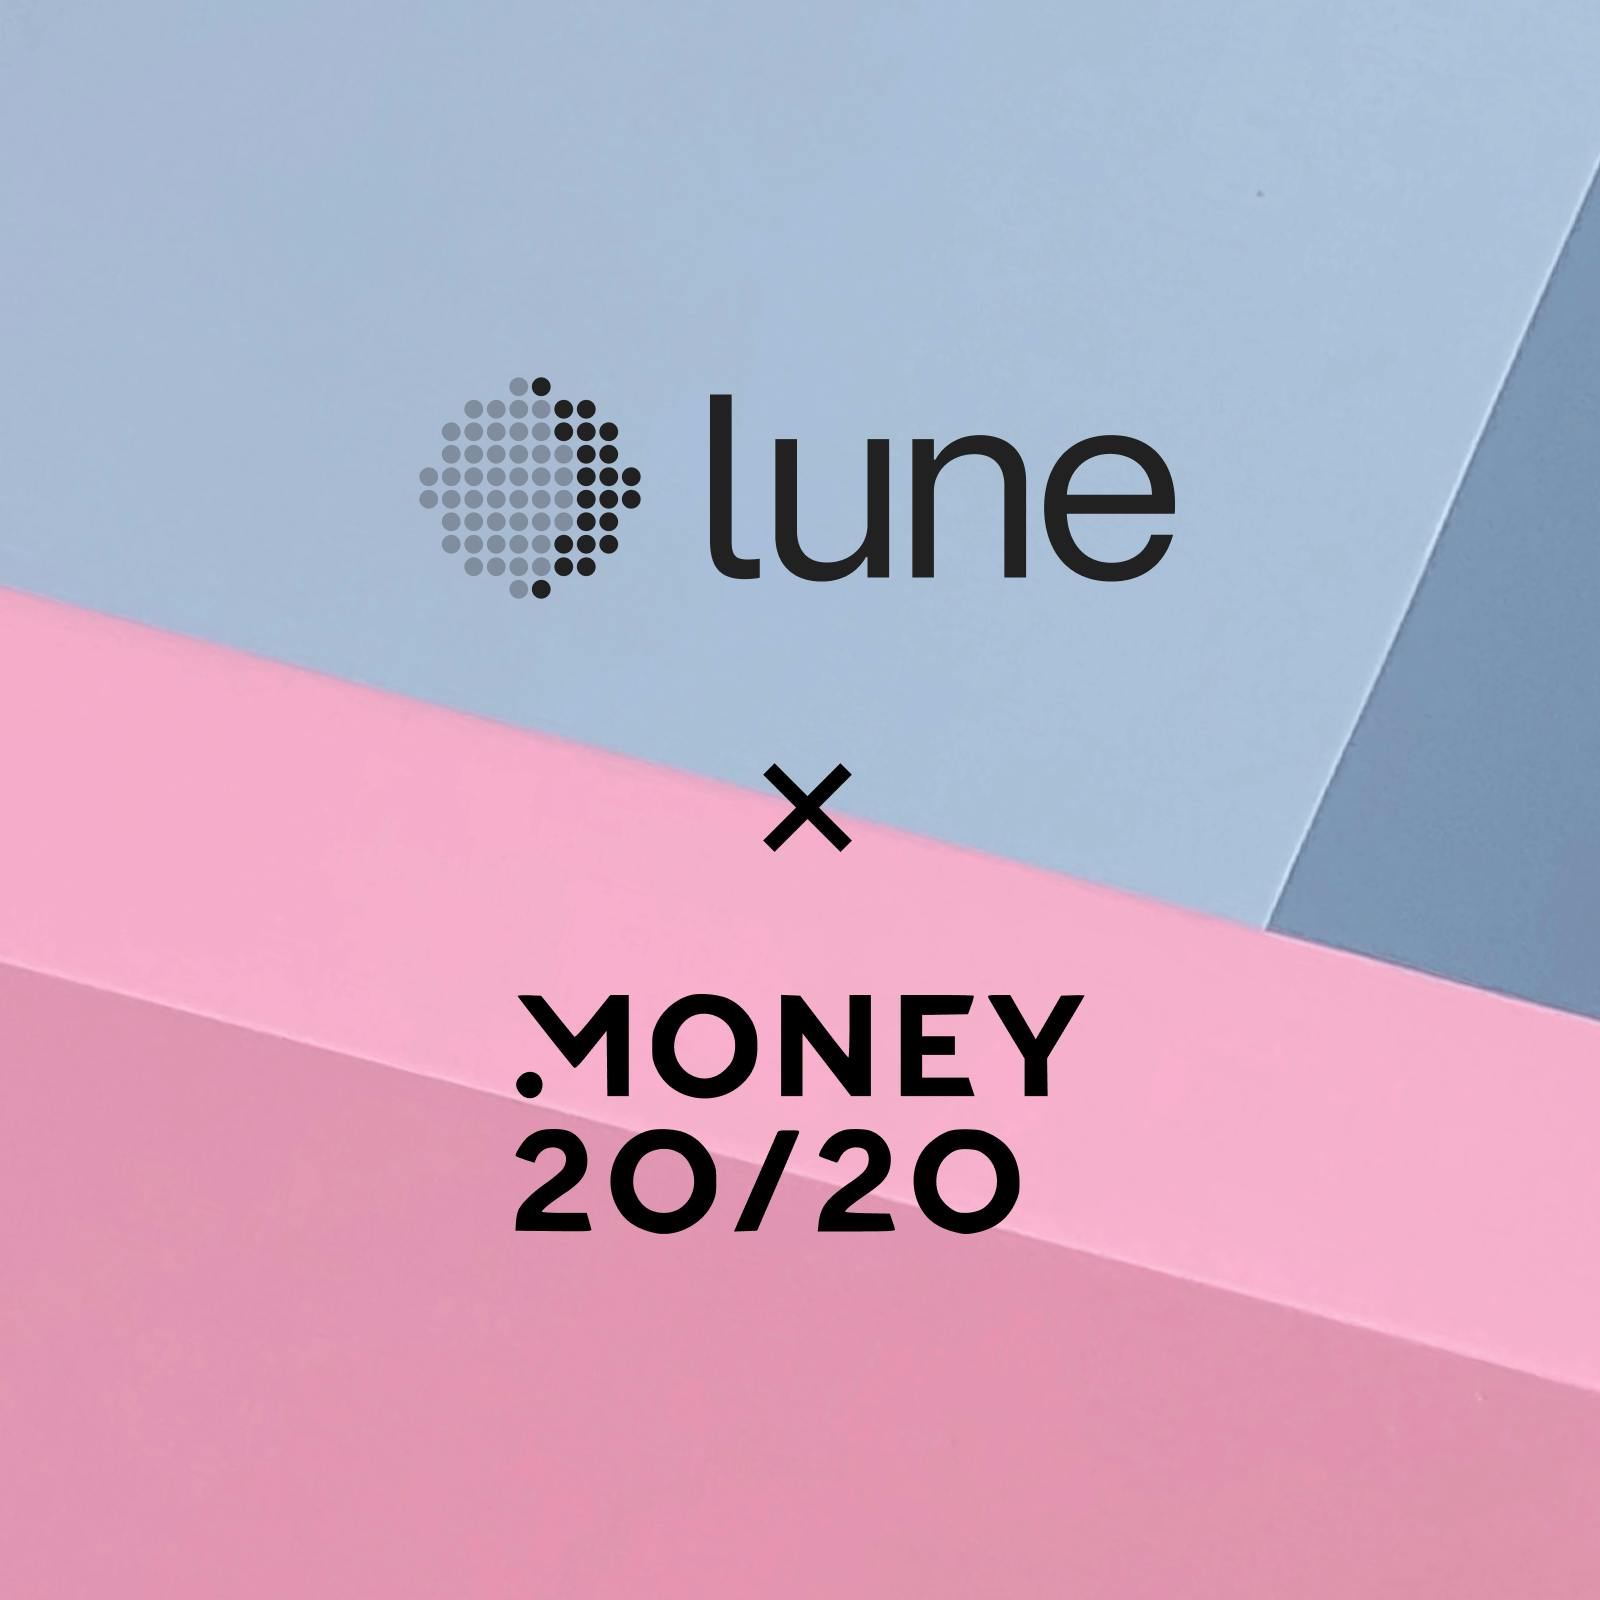 How do we rebuild financial products to be climate positive? Money20/20 panel with Lune’s CEO Erik Stadigh